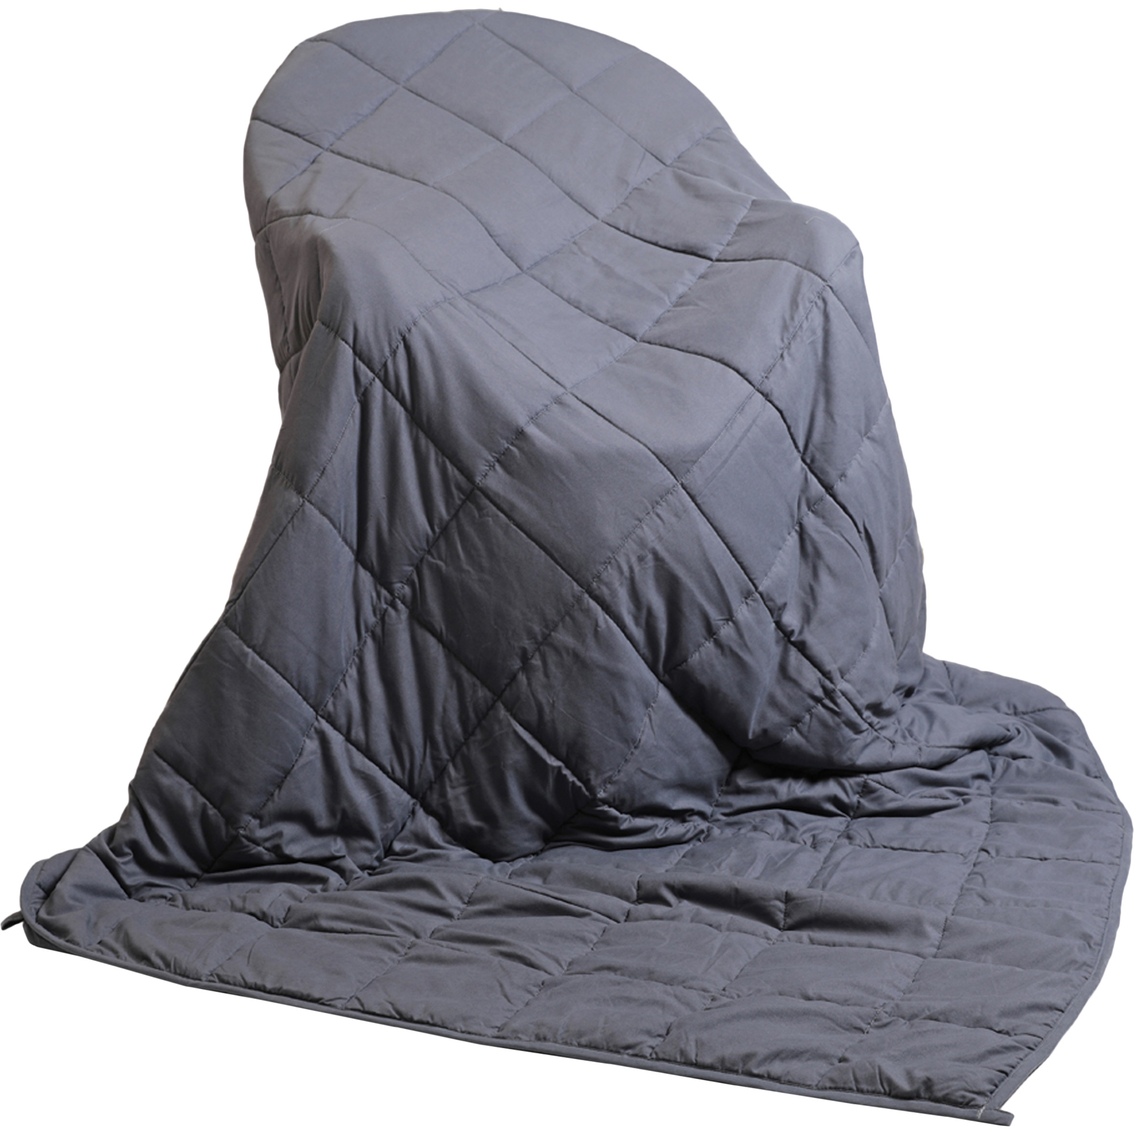 Kathy Ireland Home Weighted Blanket - Image 2 of 5